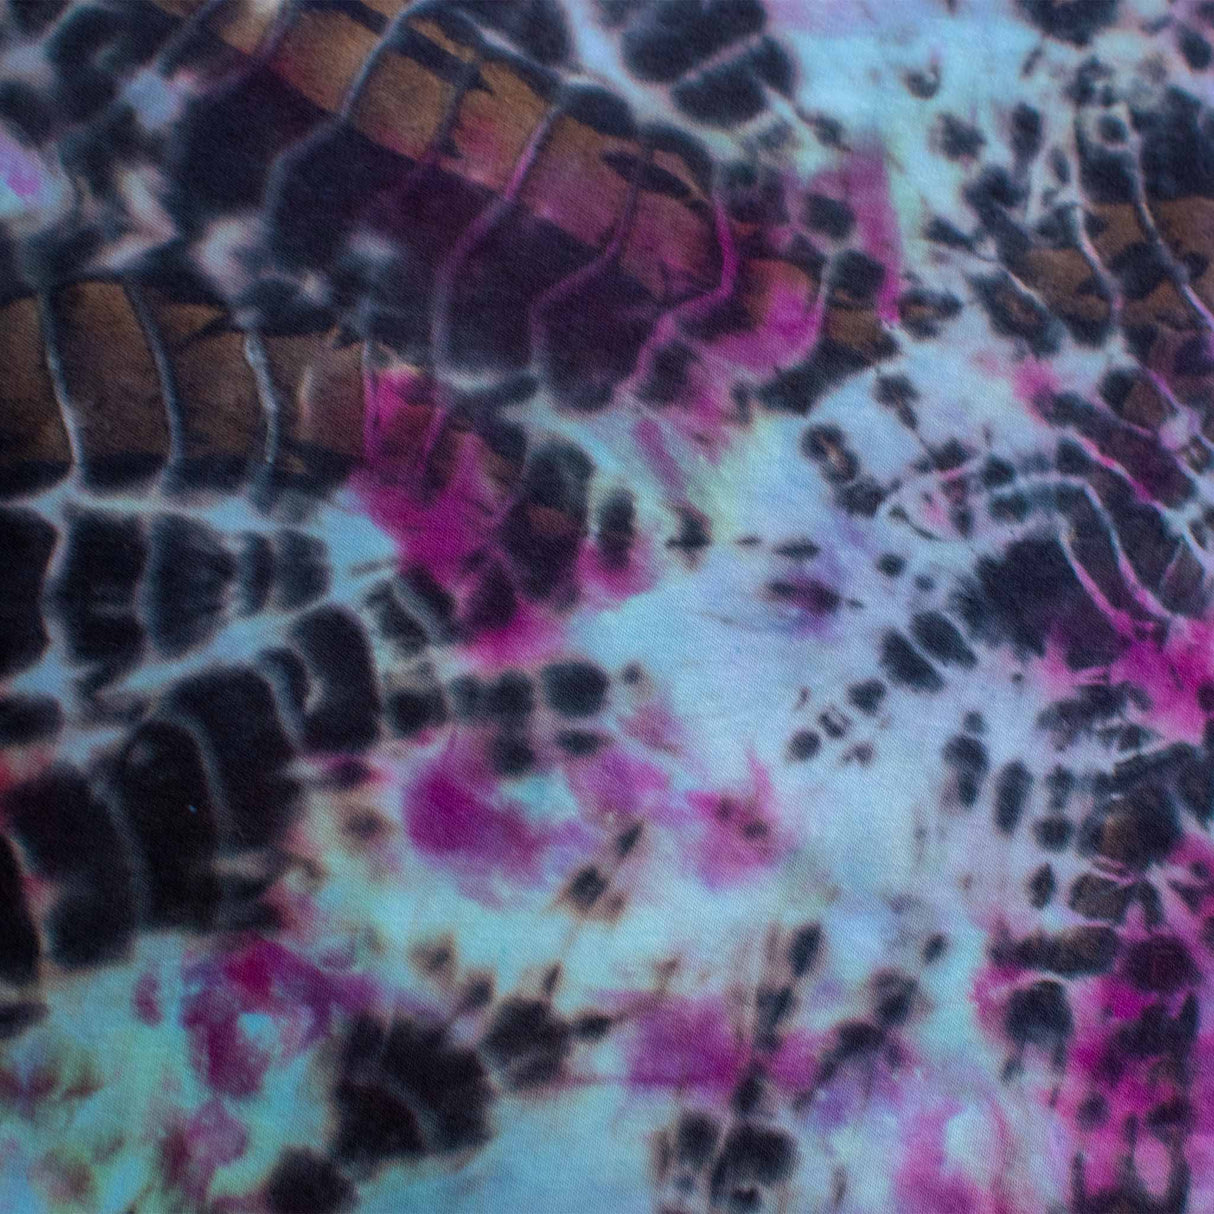 Long-sleeved t-shirt featuring a dual tie-dye technique, with intricate patterns of black crackle and bursts of pink and aqua blue, creating a visually striking and unique design.